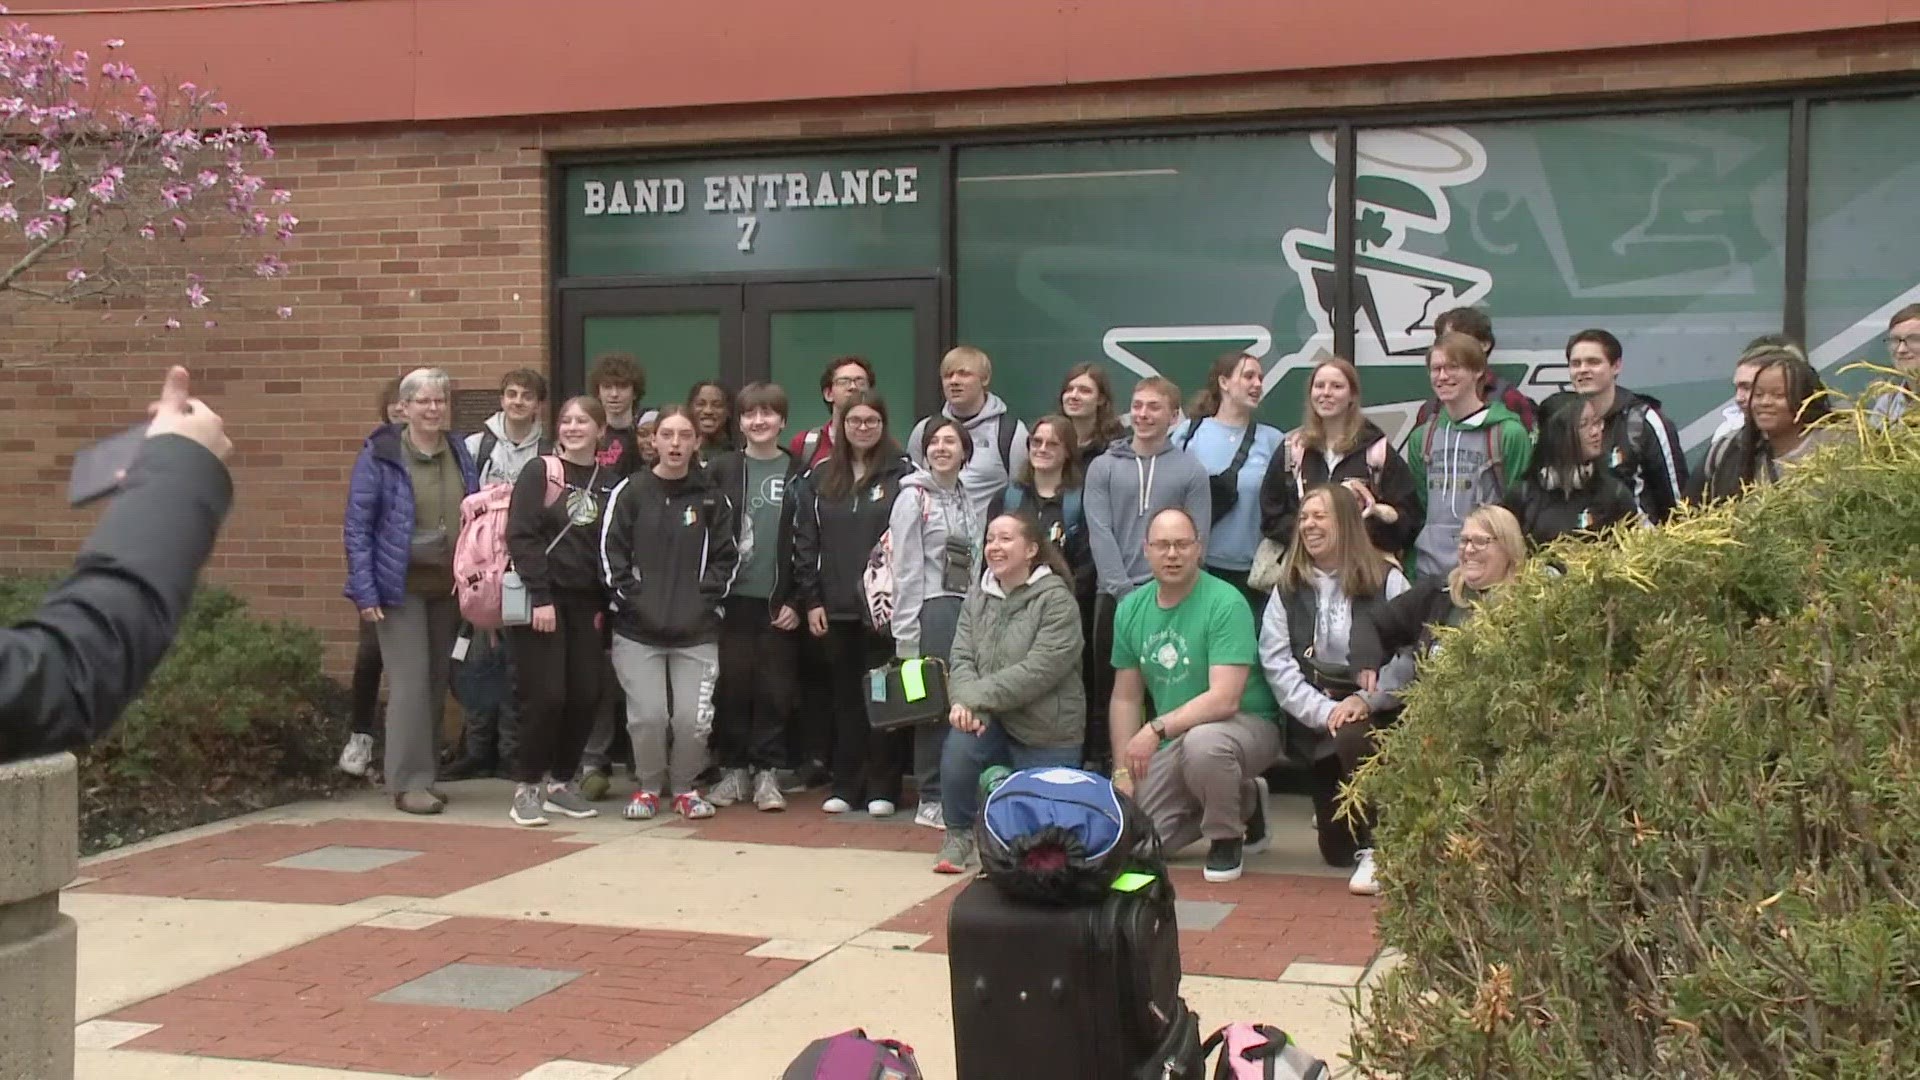 Akron St. VincentSt. Mary High School band to march in Ireland